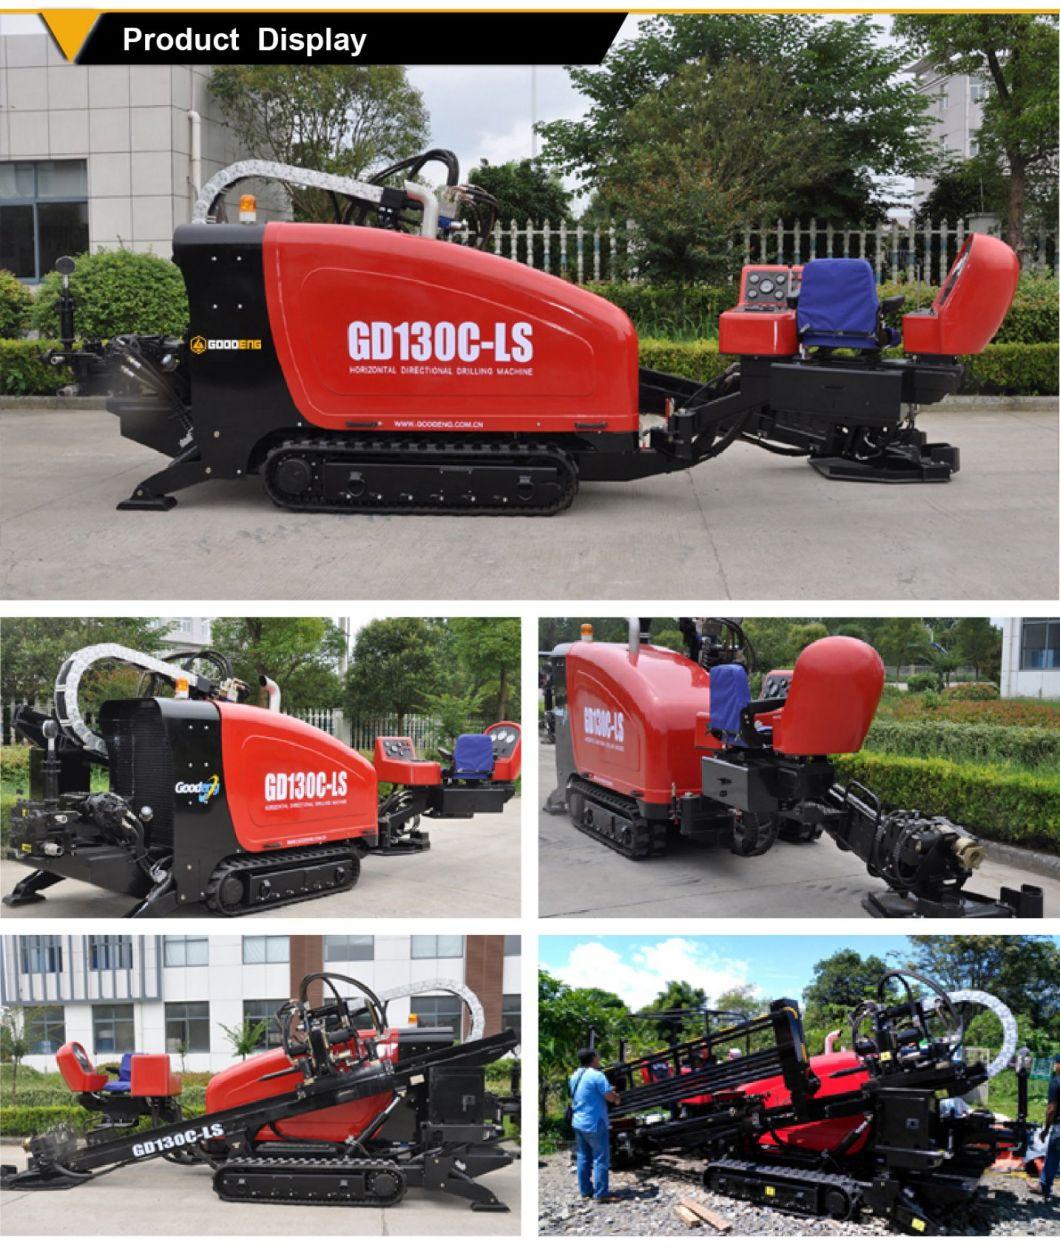 Goodeng GD130C-LS  horizontal directional drilling machine with CE certificate